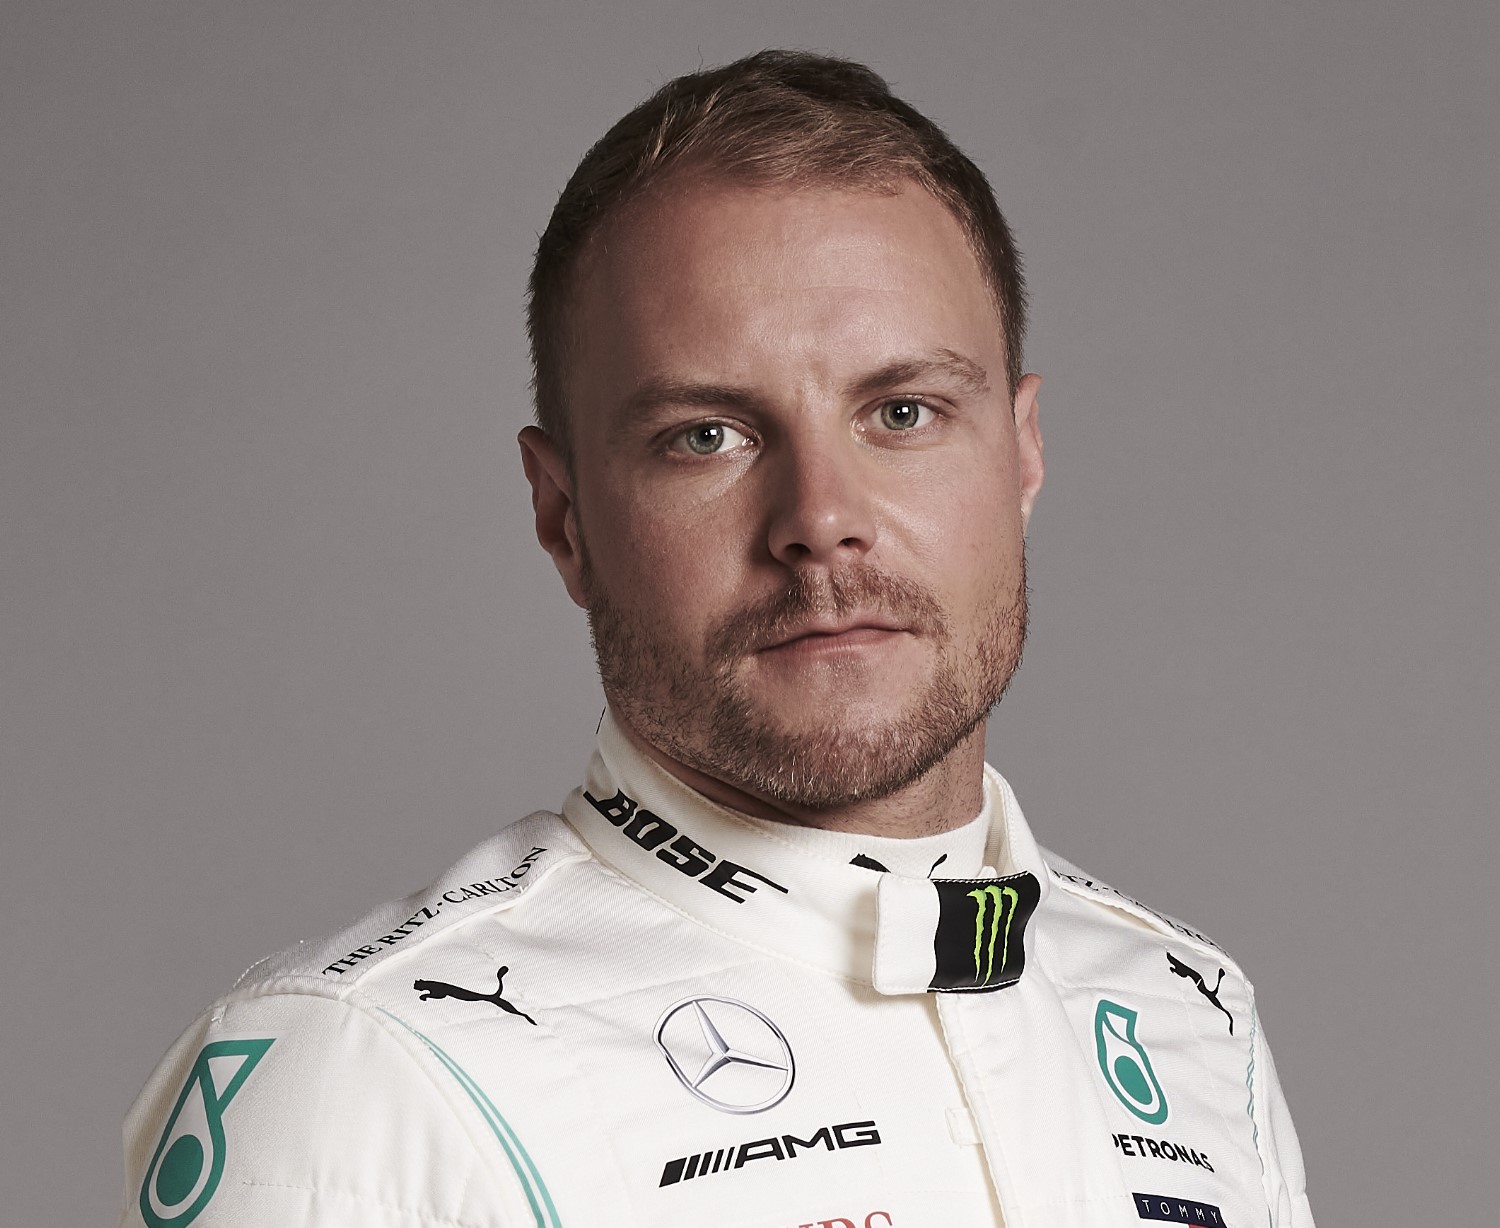 If Vettel takes his seat, Bottas is more likely to stay on at Mercedes as a reserve driver